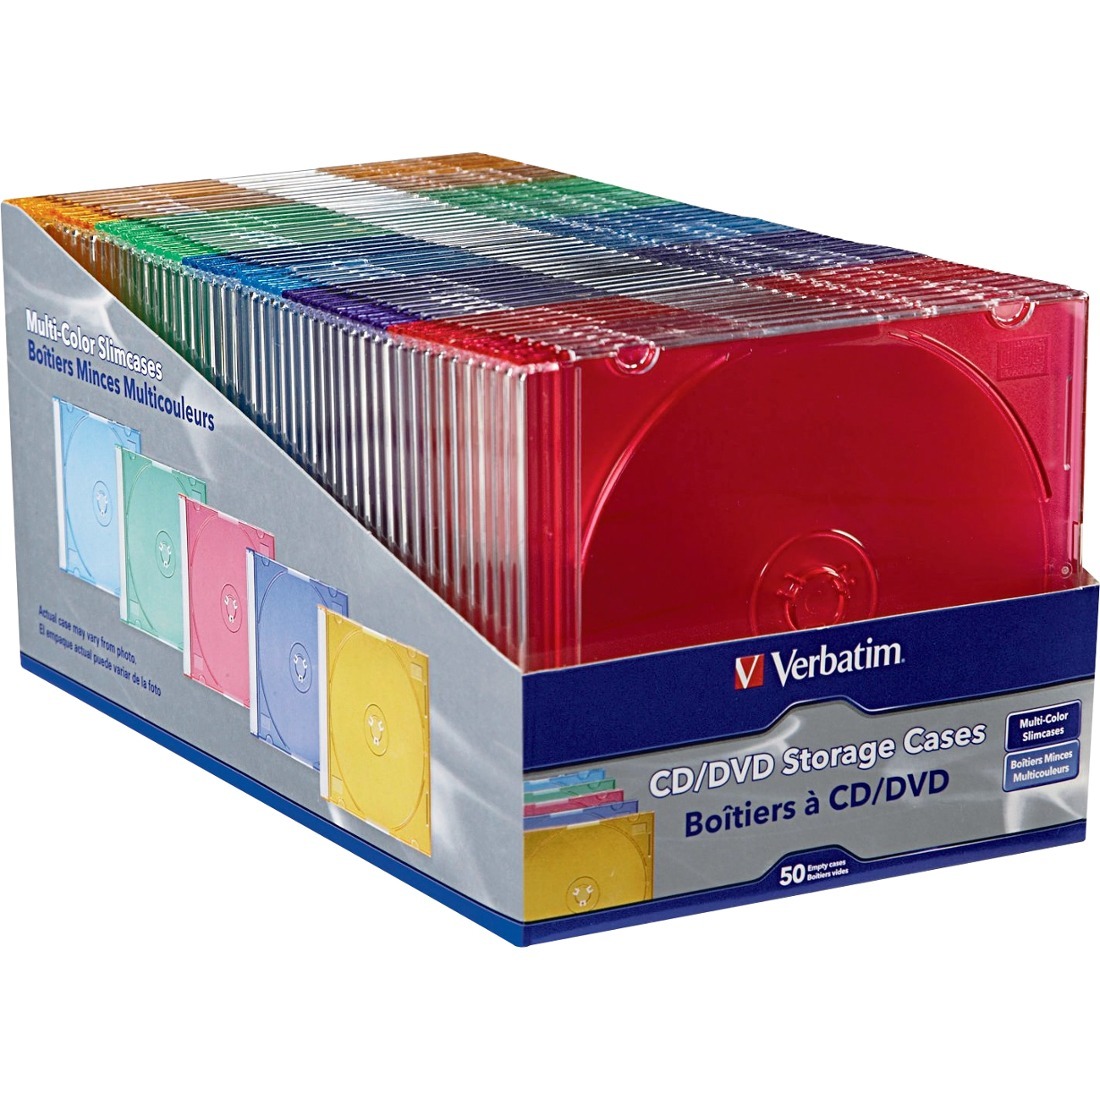 CD/DVD Color Slim Jewel Cases, Assorted - 50pk - image 1 of 2